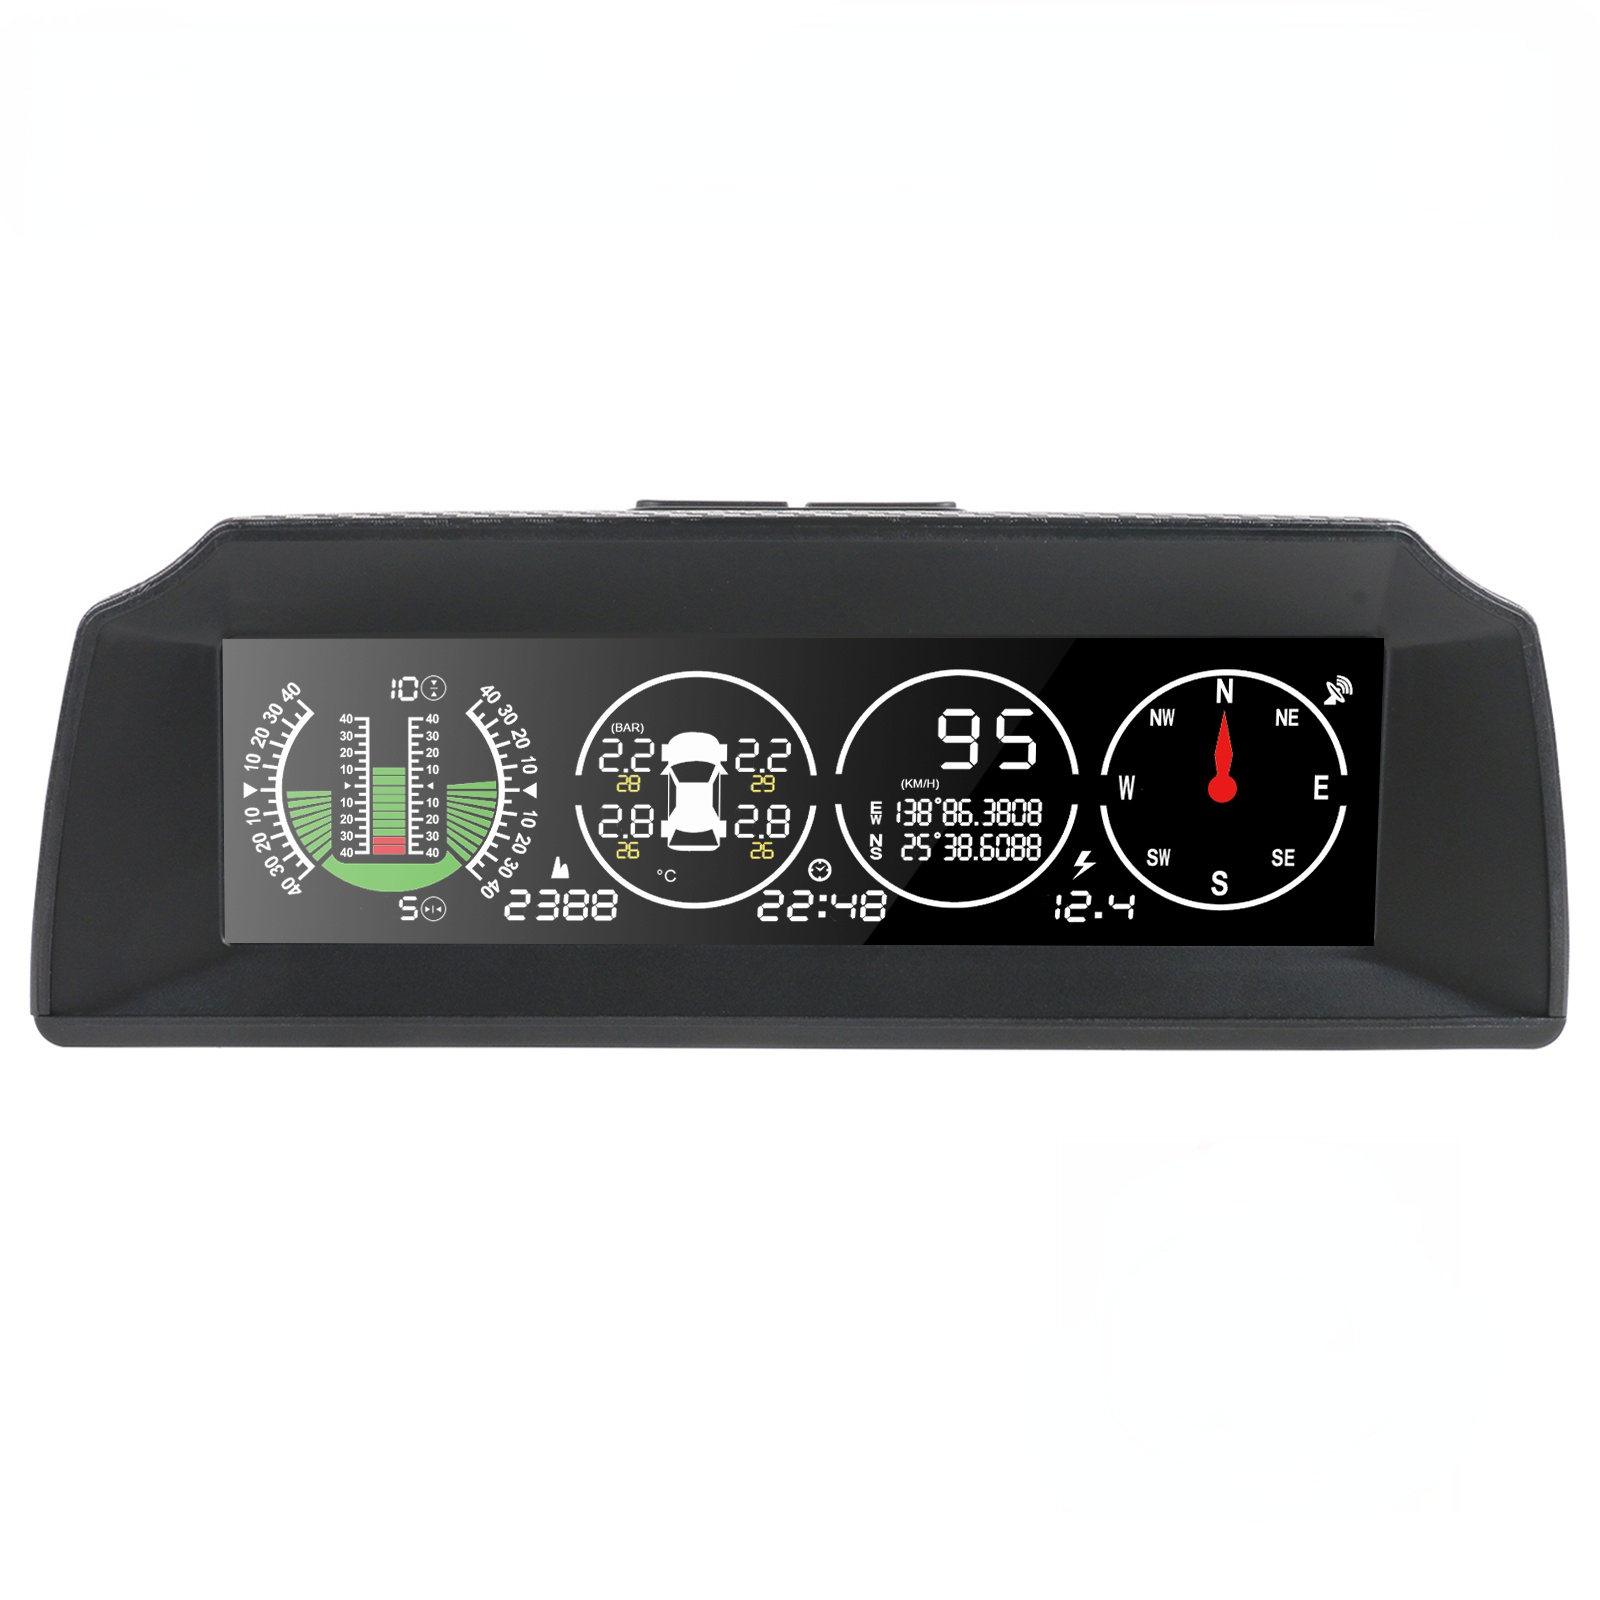 AUTOOL X91 Car 3in1 GPS TPMS HUD Universal for All Vehicle Speed Slope Meter Inclinometer Clock Compass Pitch Tilt Angle Protra